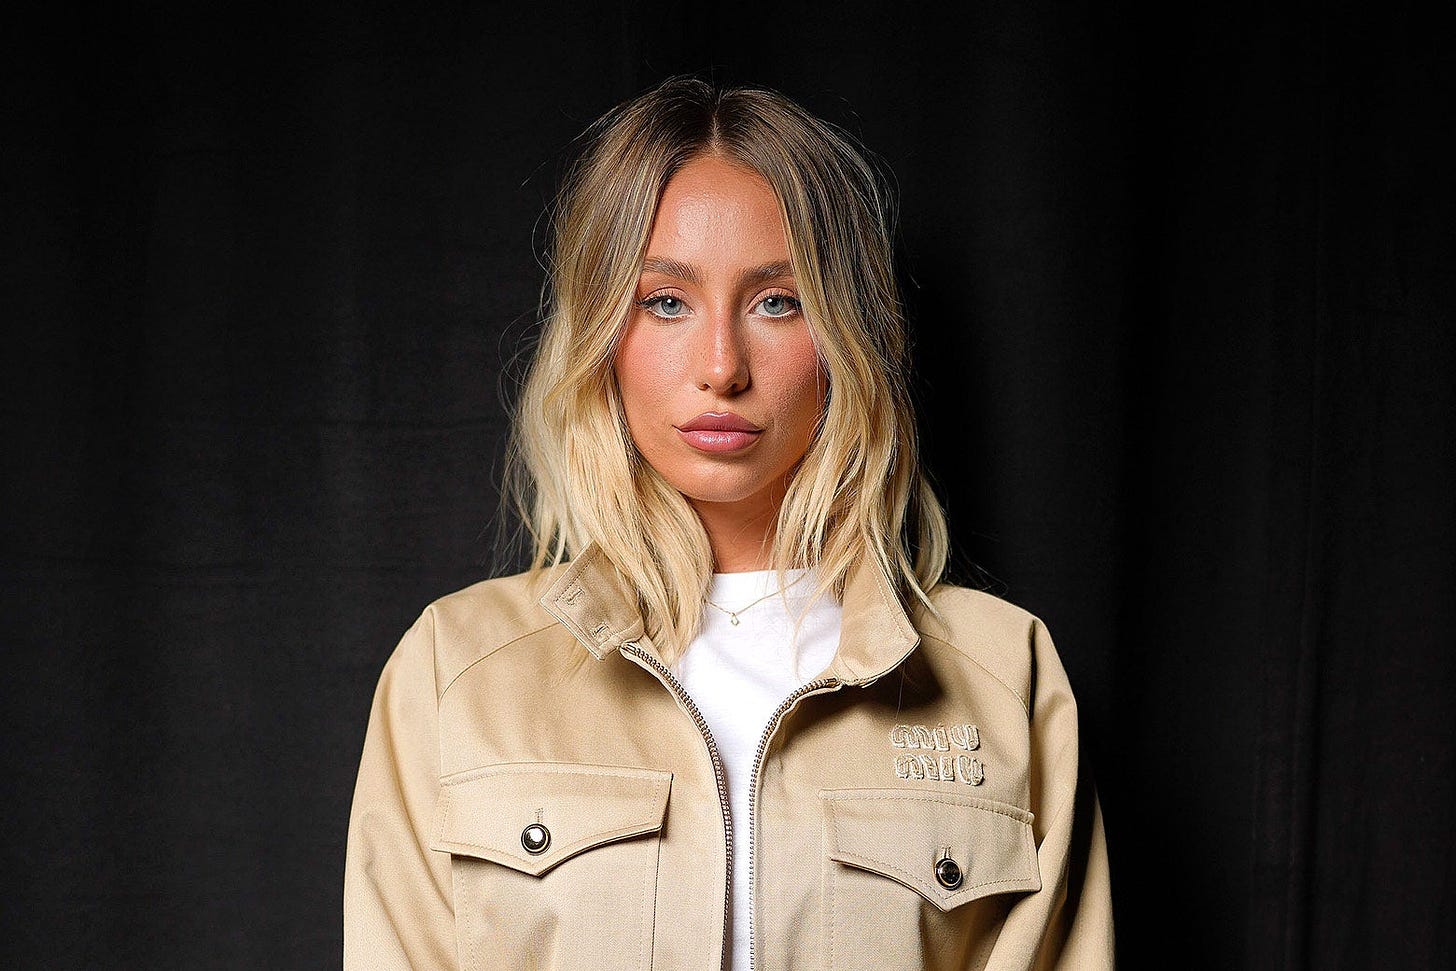 A blond white woman in a white shirt and tan jacket slightly smirks and looks ahead, in front of a black backdrop.